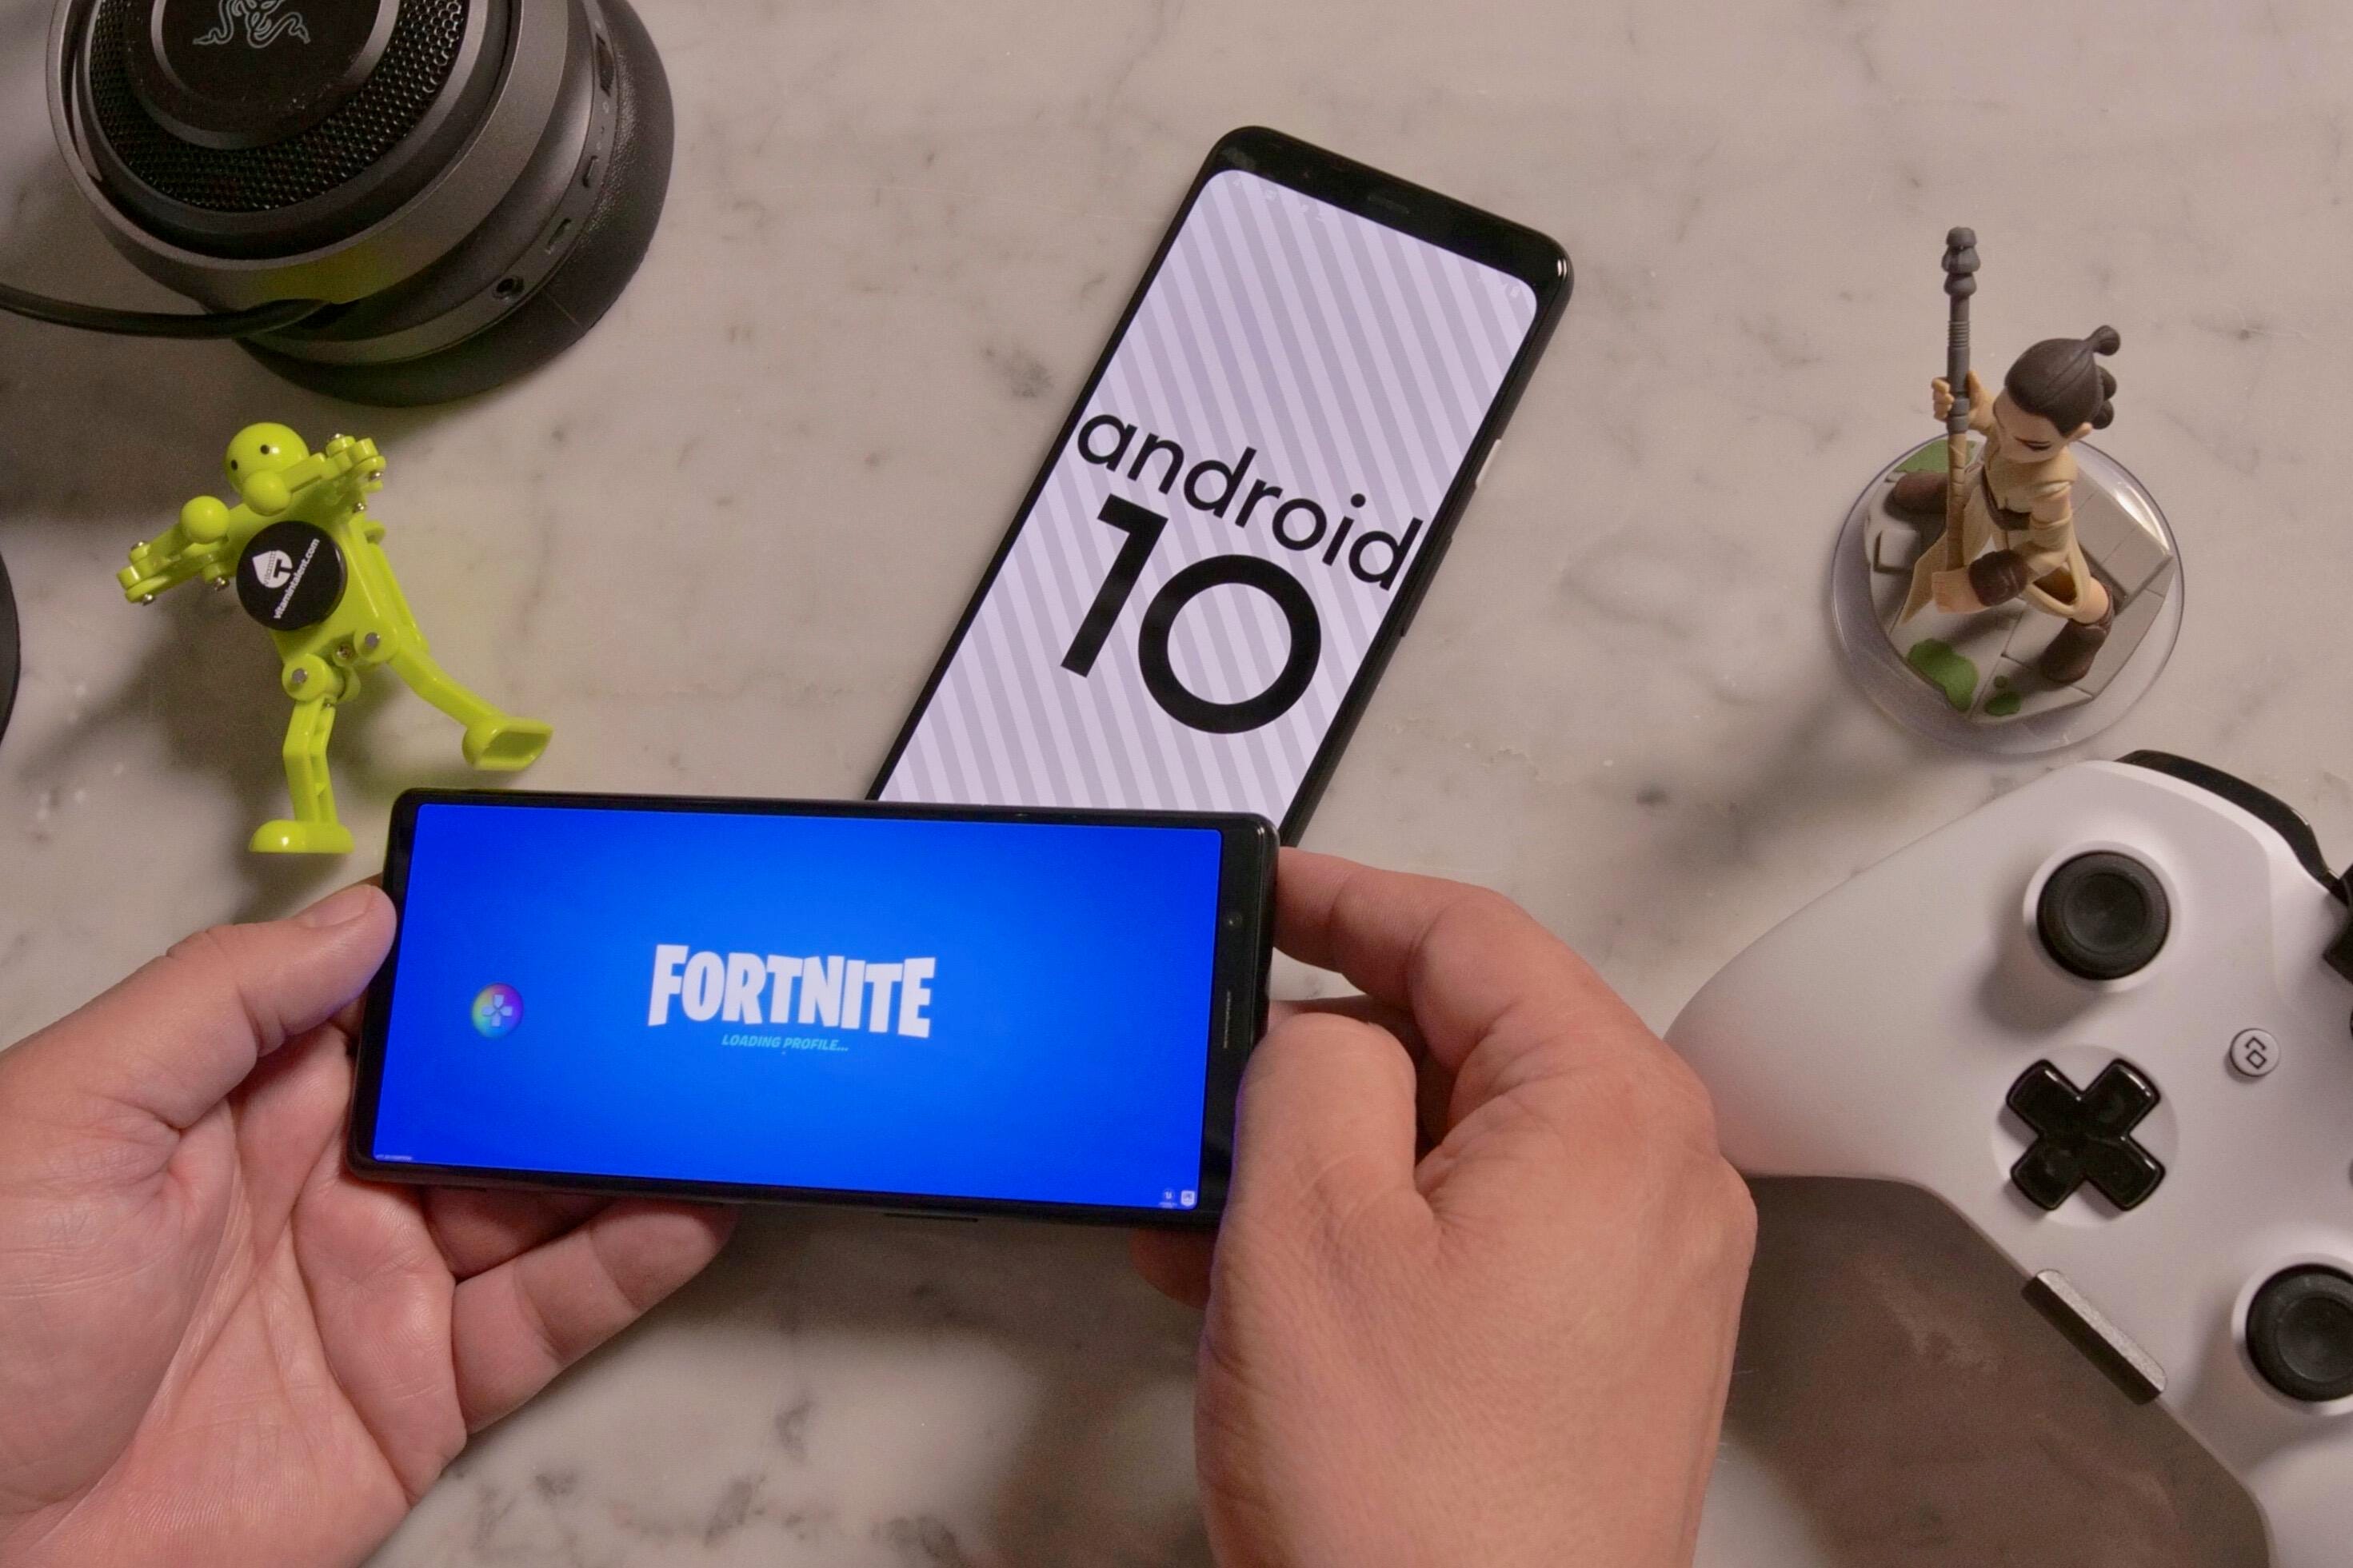 Fortnite Chapter 2: How to download and install it on Android phones with less headaches